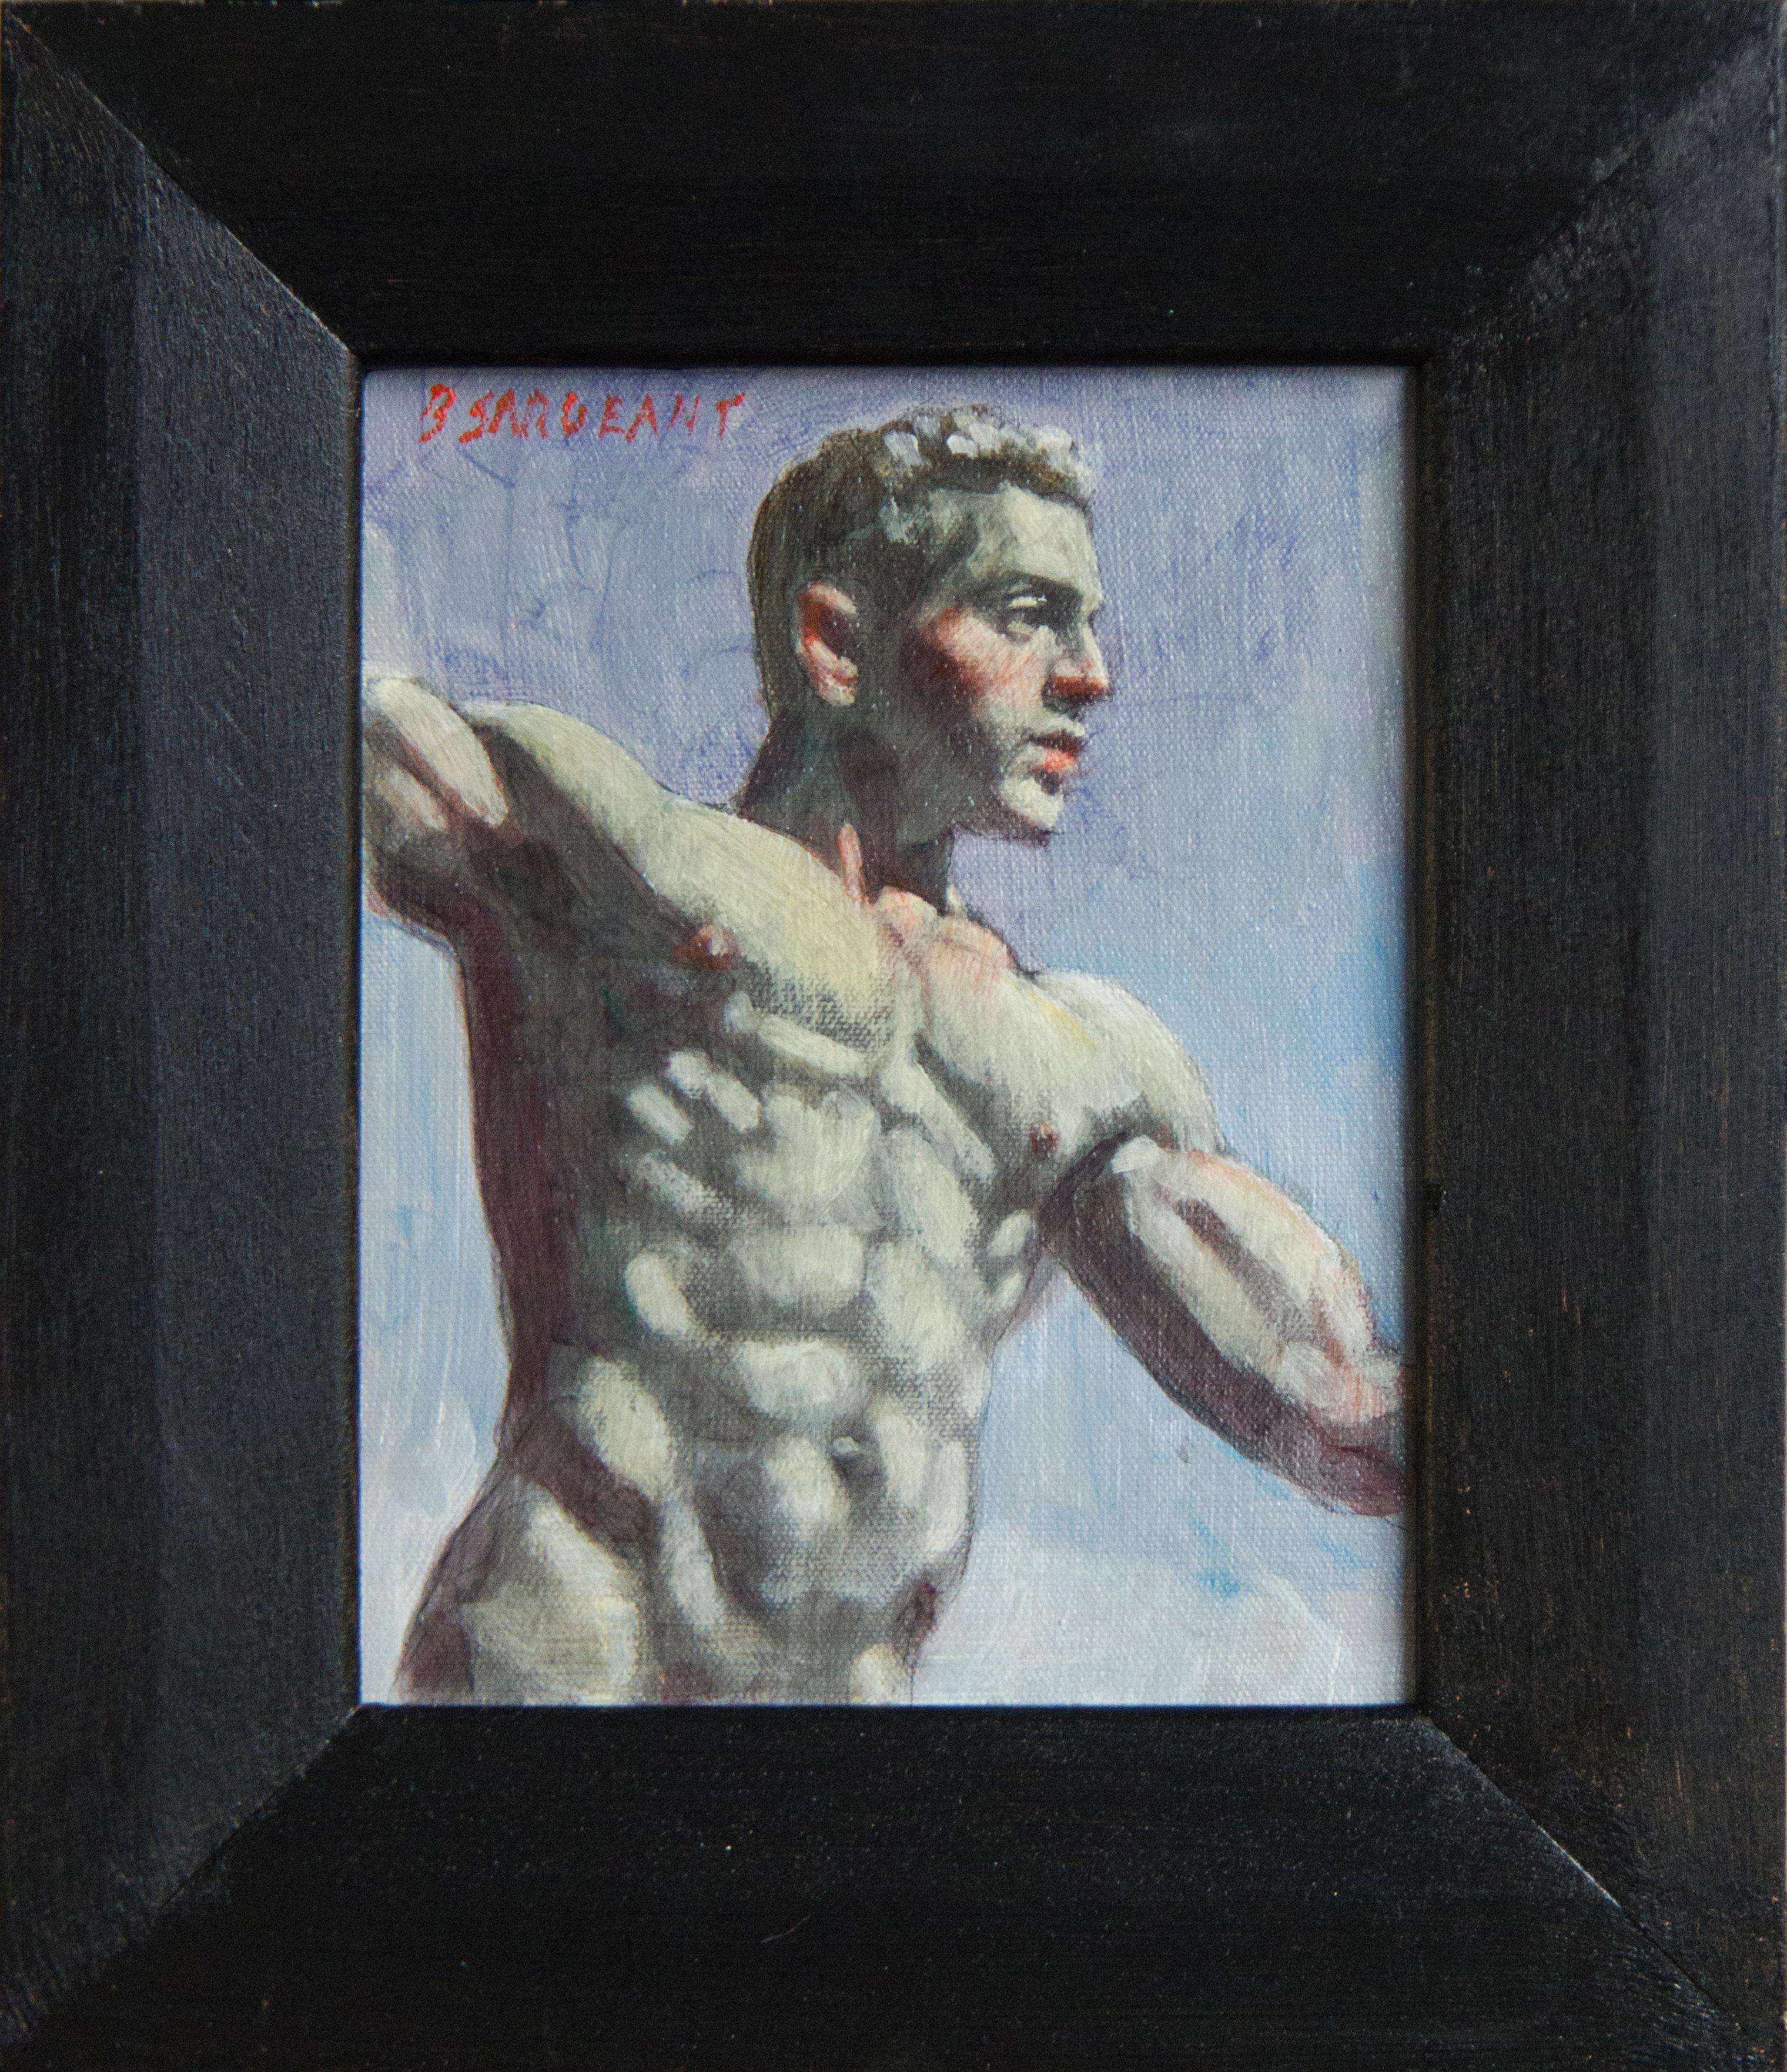 [Bruce Sargeant (1898-1938)] Man from Below - Painting by Mark Beard